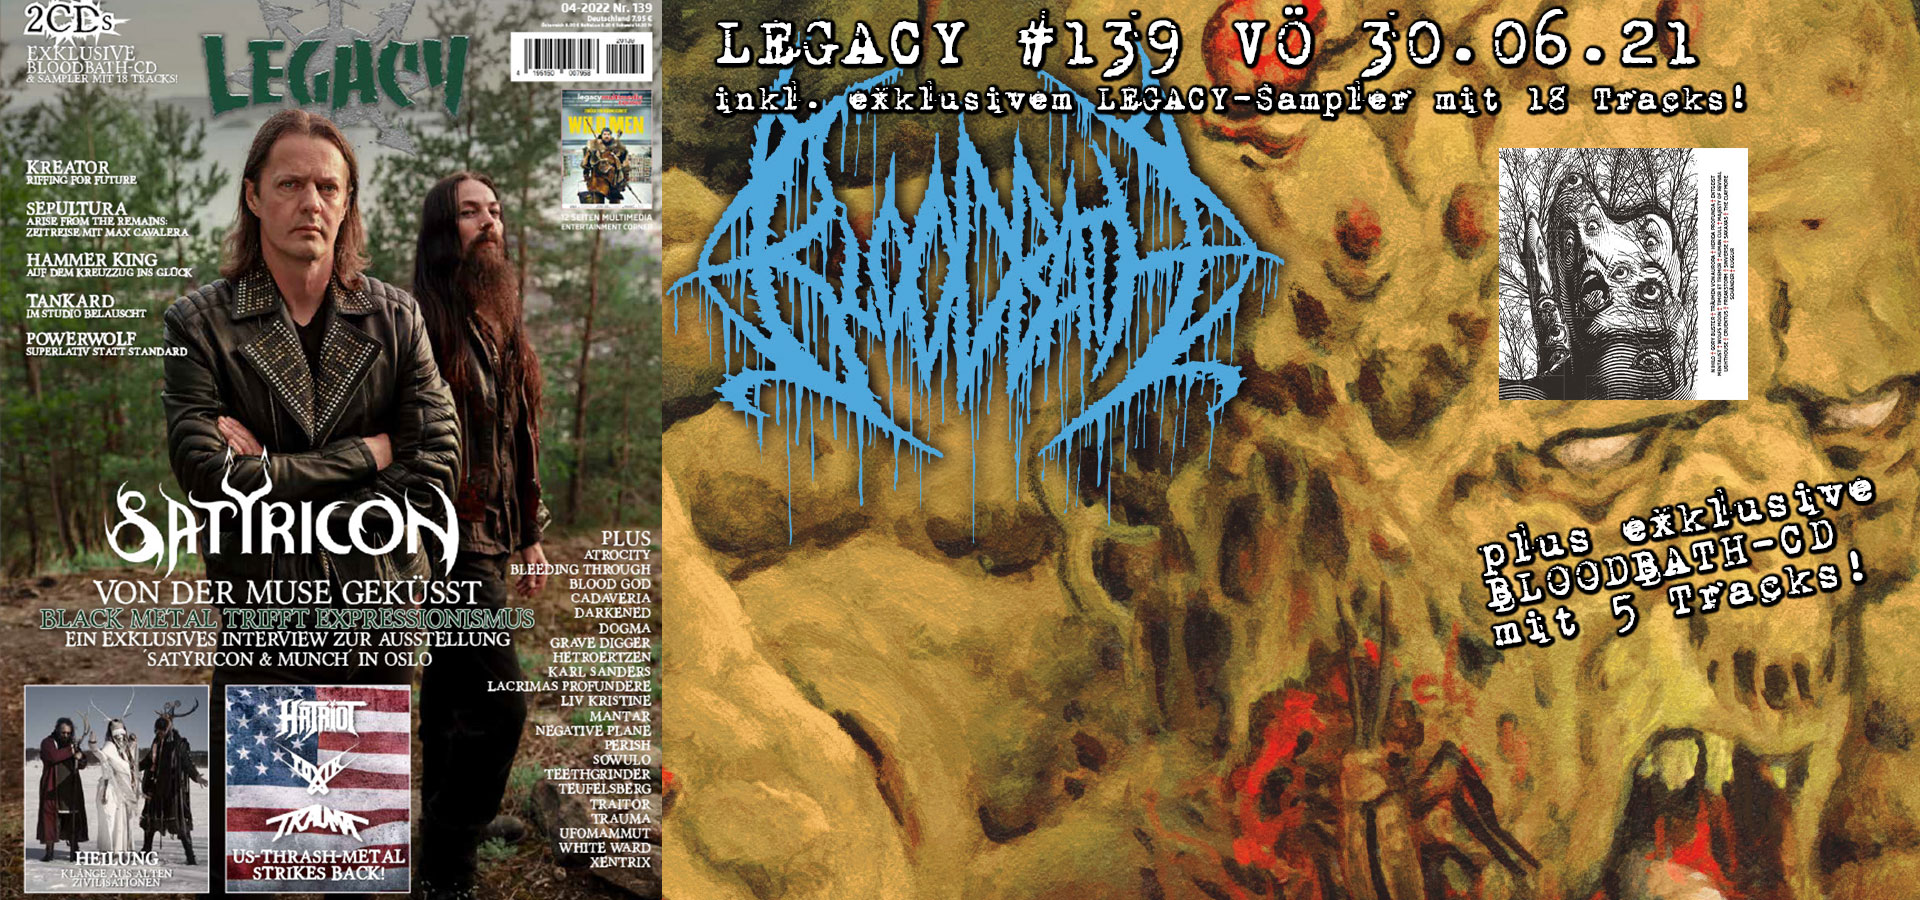 LEGACY #139 out 30.06.2022